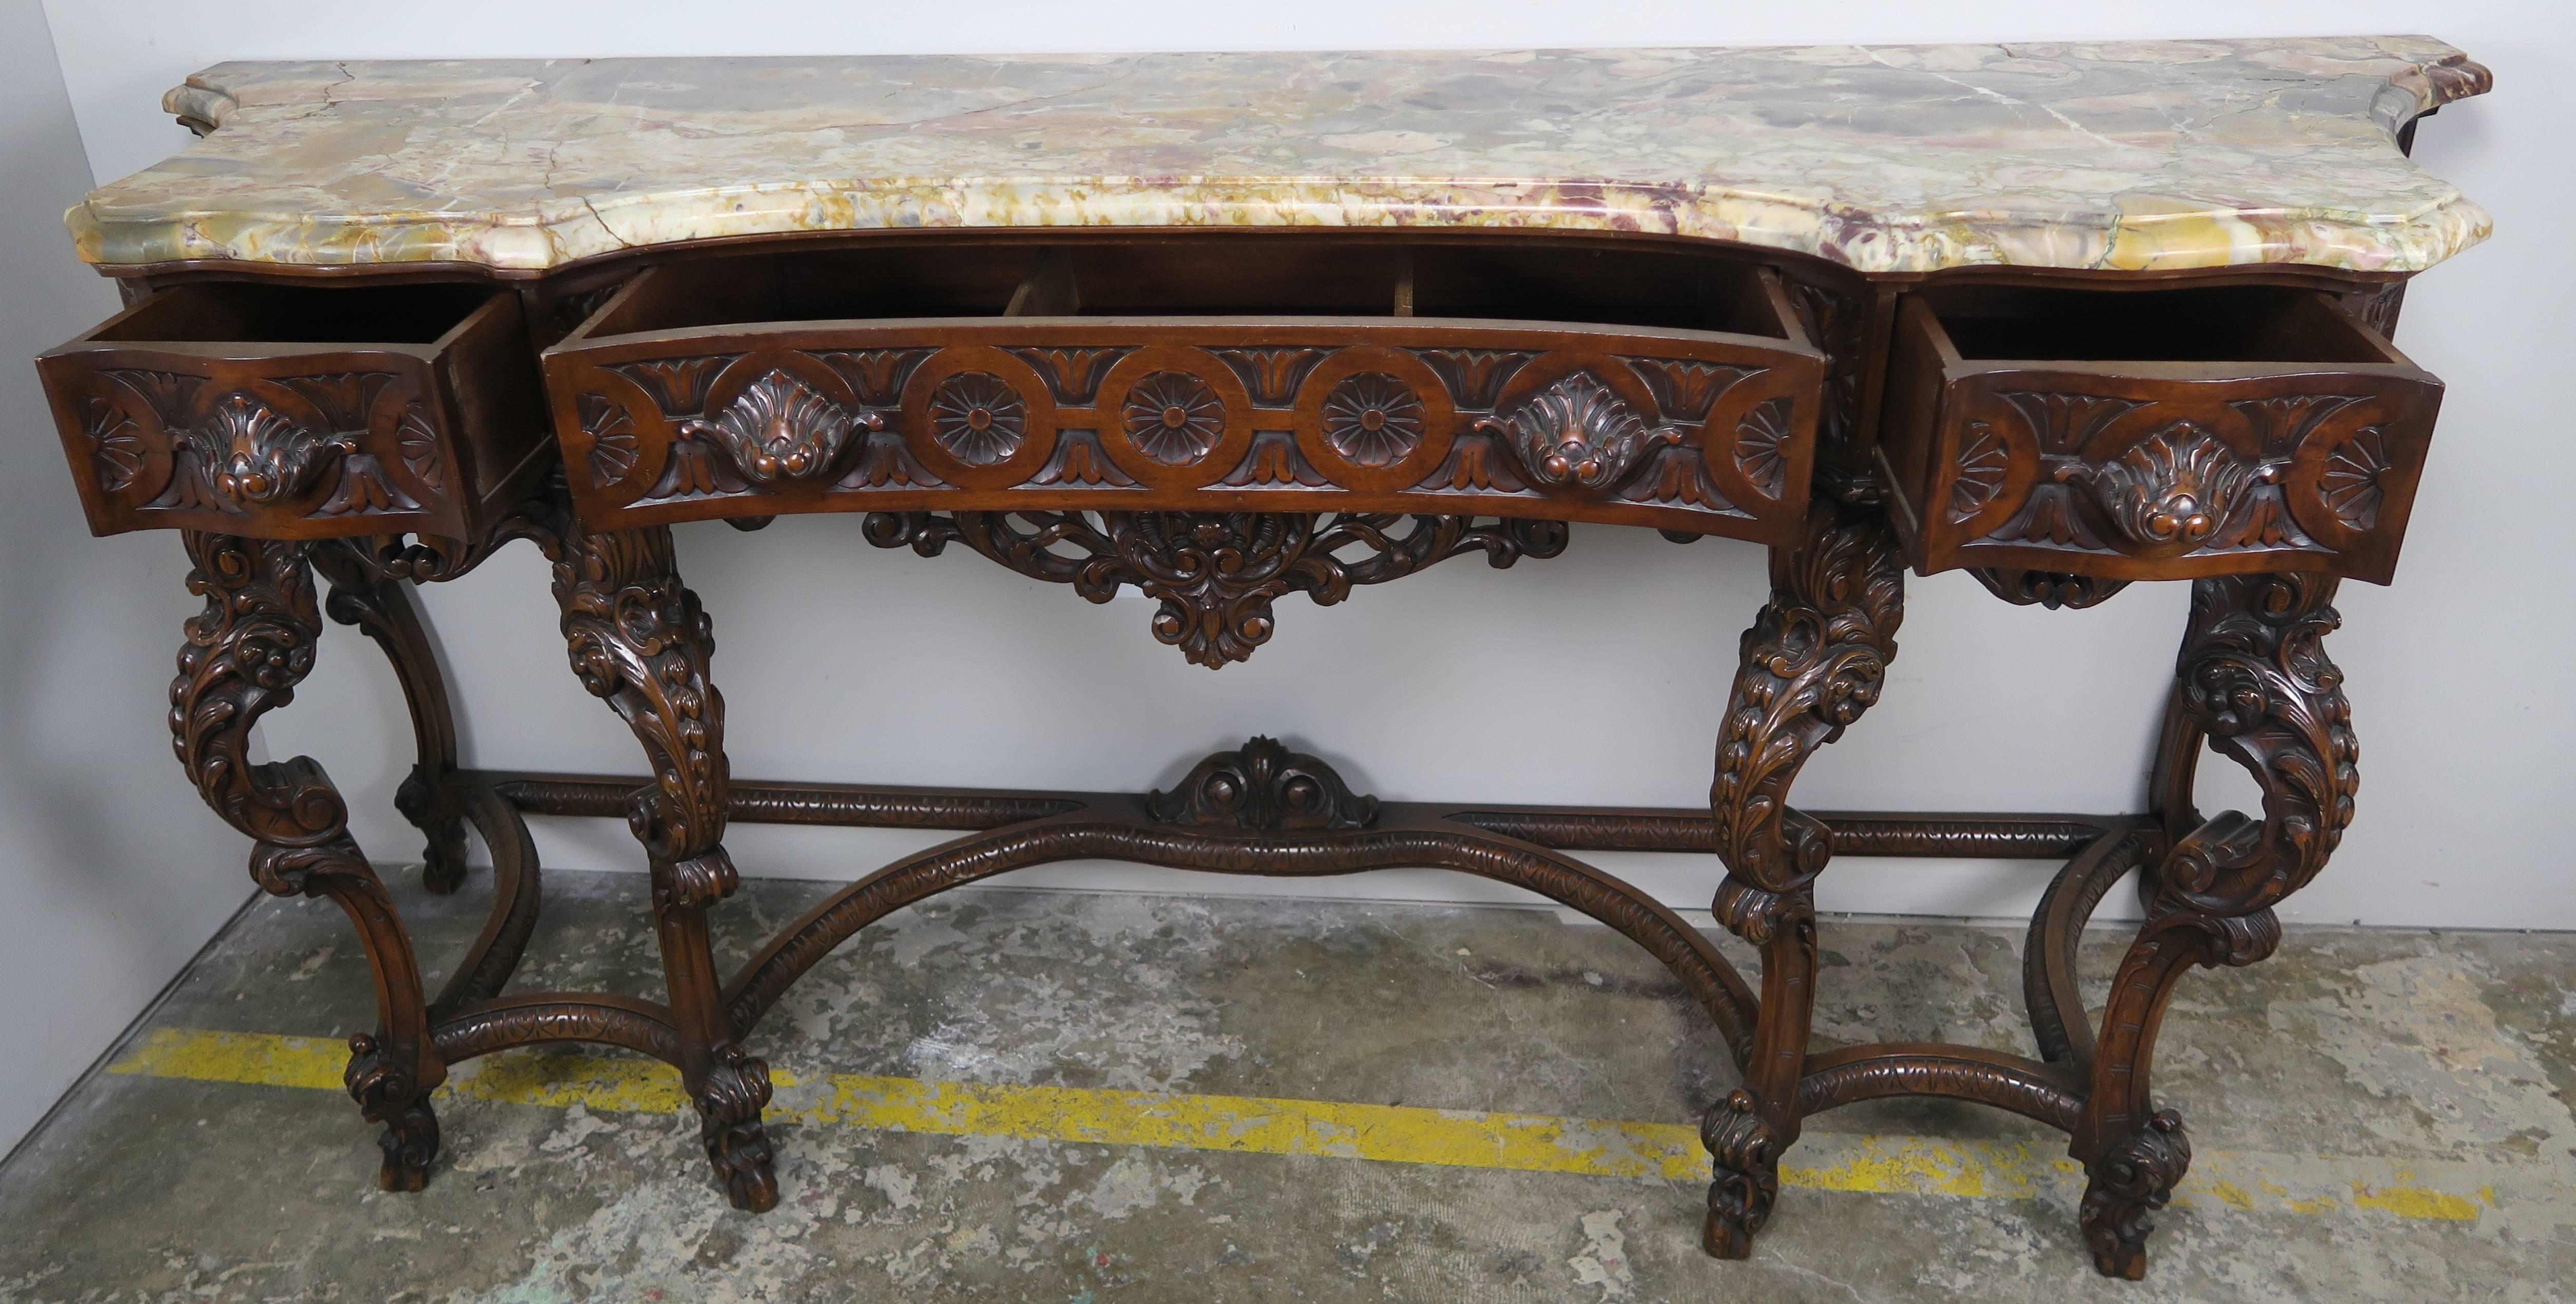 19th century French carved walnut sideboard standing on six cabriole legs. Three drawers with great storage for silver and serving pieces. Detailed carving throughout including carved shell drawer pulls. This shell motif is repeated throughout. Rare